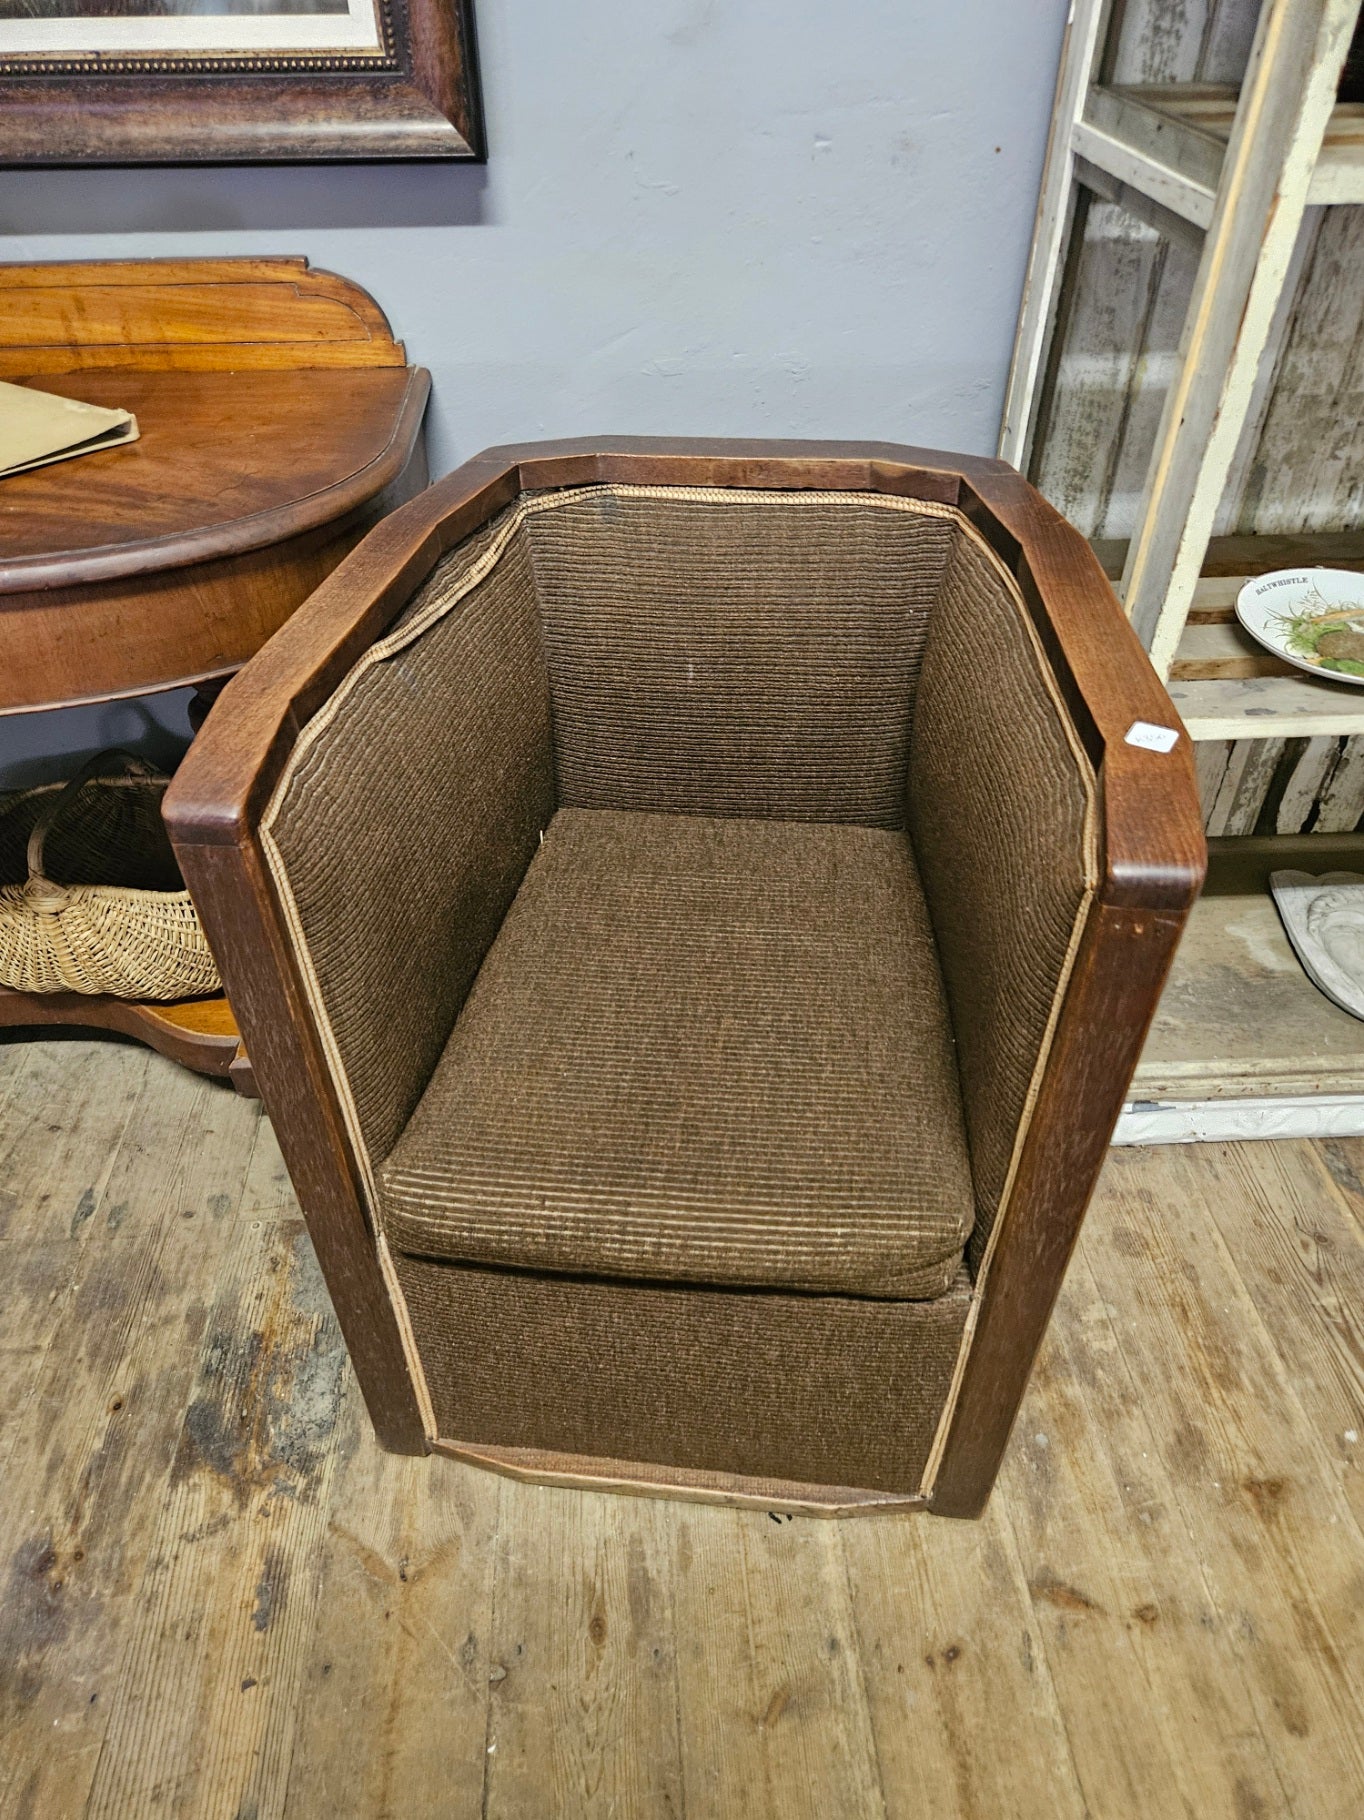 Arts & crafts style chair